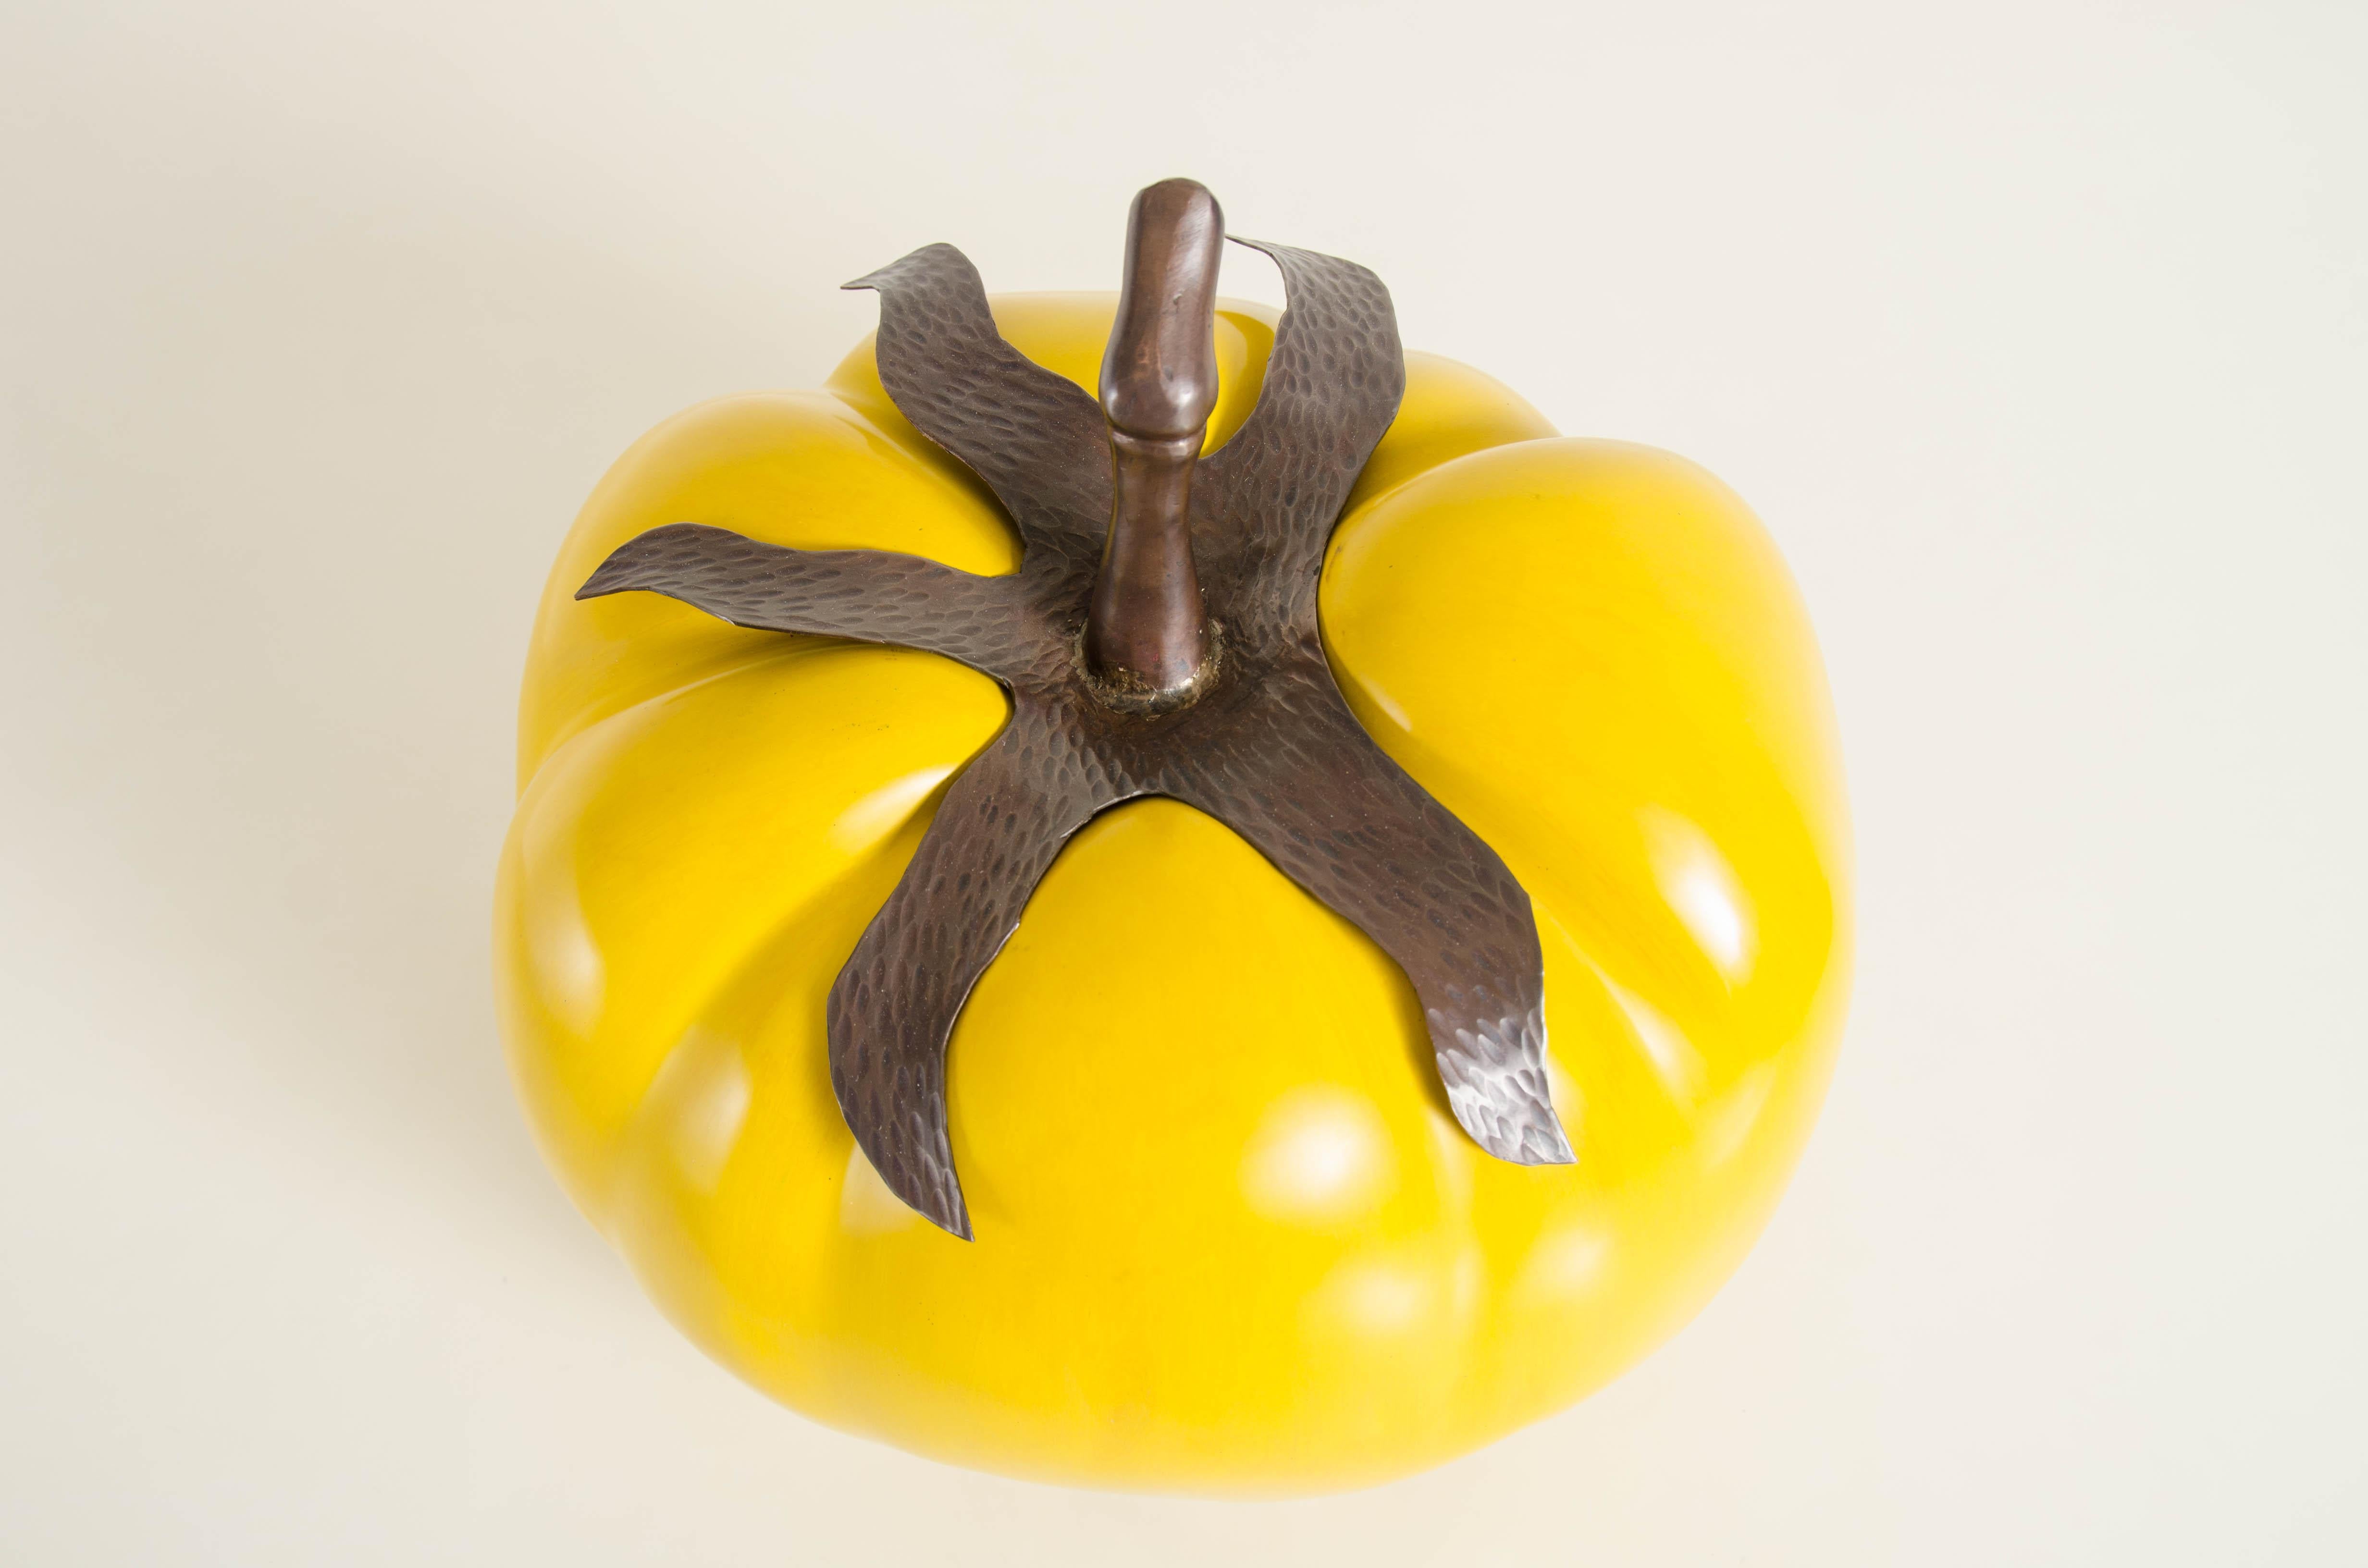 Repoussé Tomato with Copper Stem, Yellow Lacquer by Robert Kuo, Hand Repousse